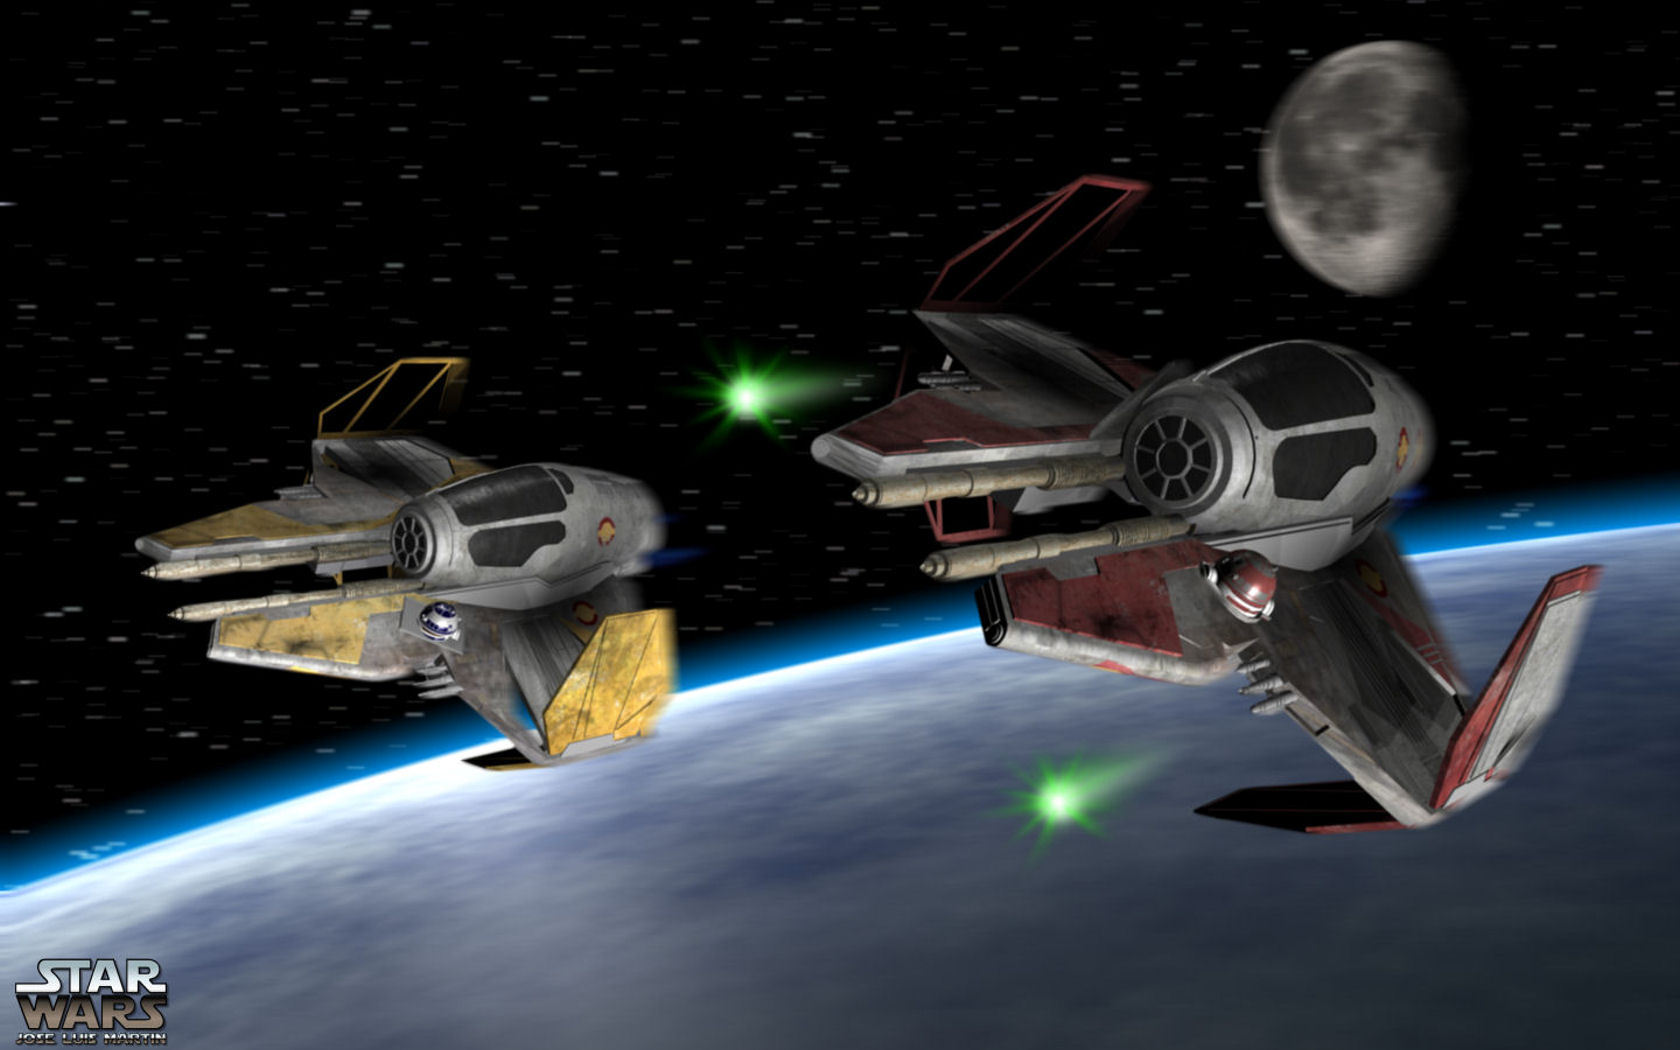 Star Wars images Jedi Fighters wallpaper photos 15486193